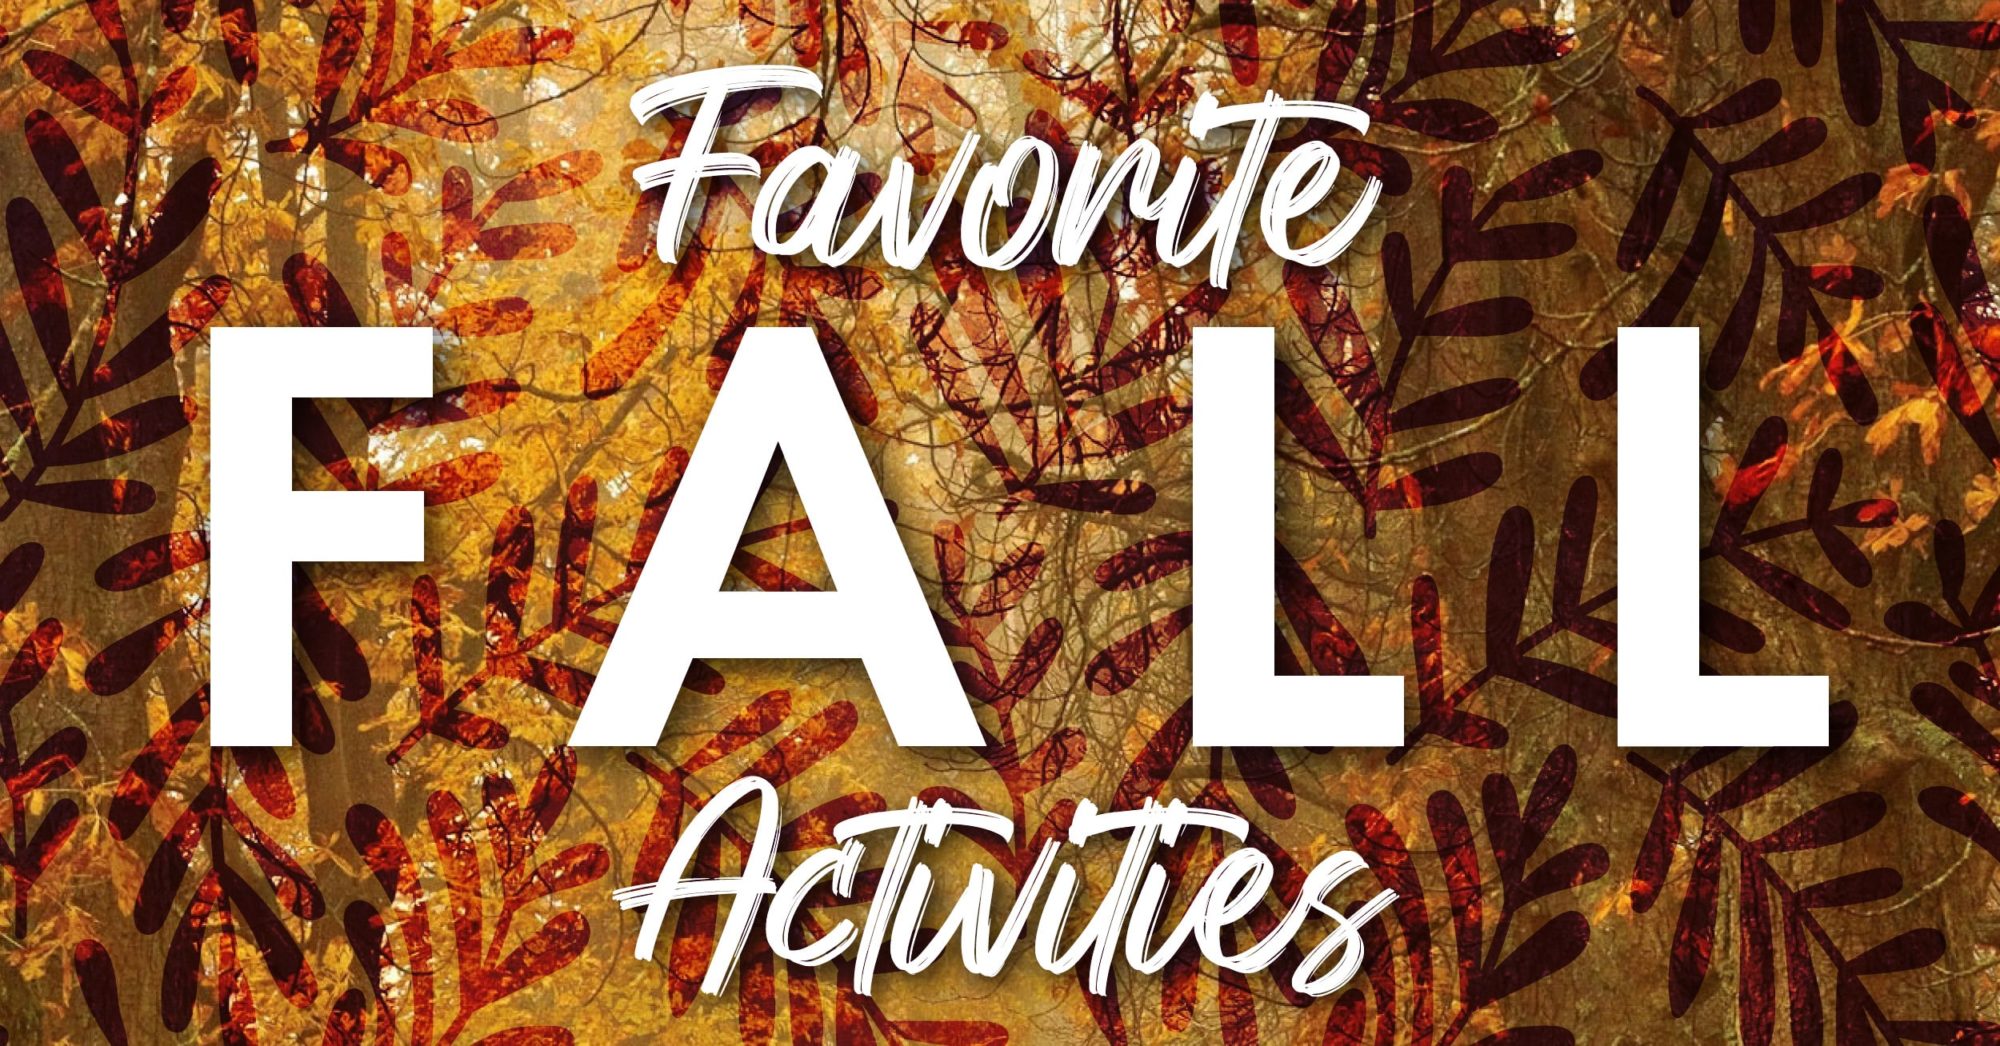 A background of fall leaves in orange, red, and brown, with text "Our Favorite Fall Activities."